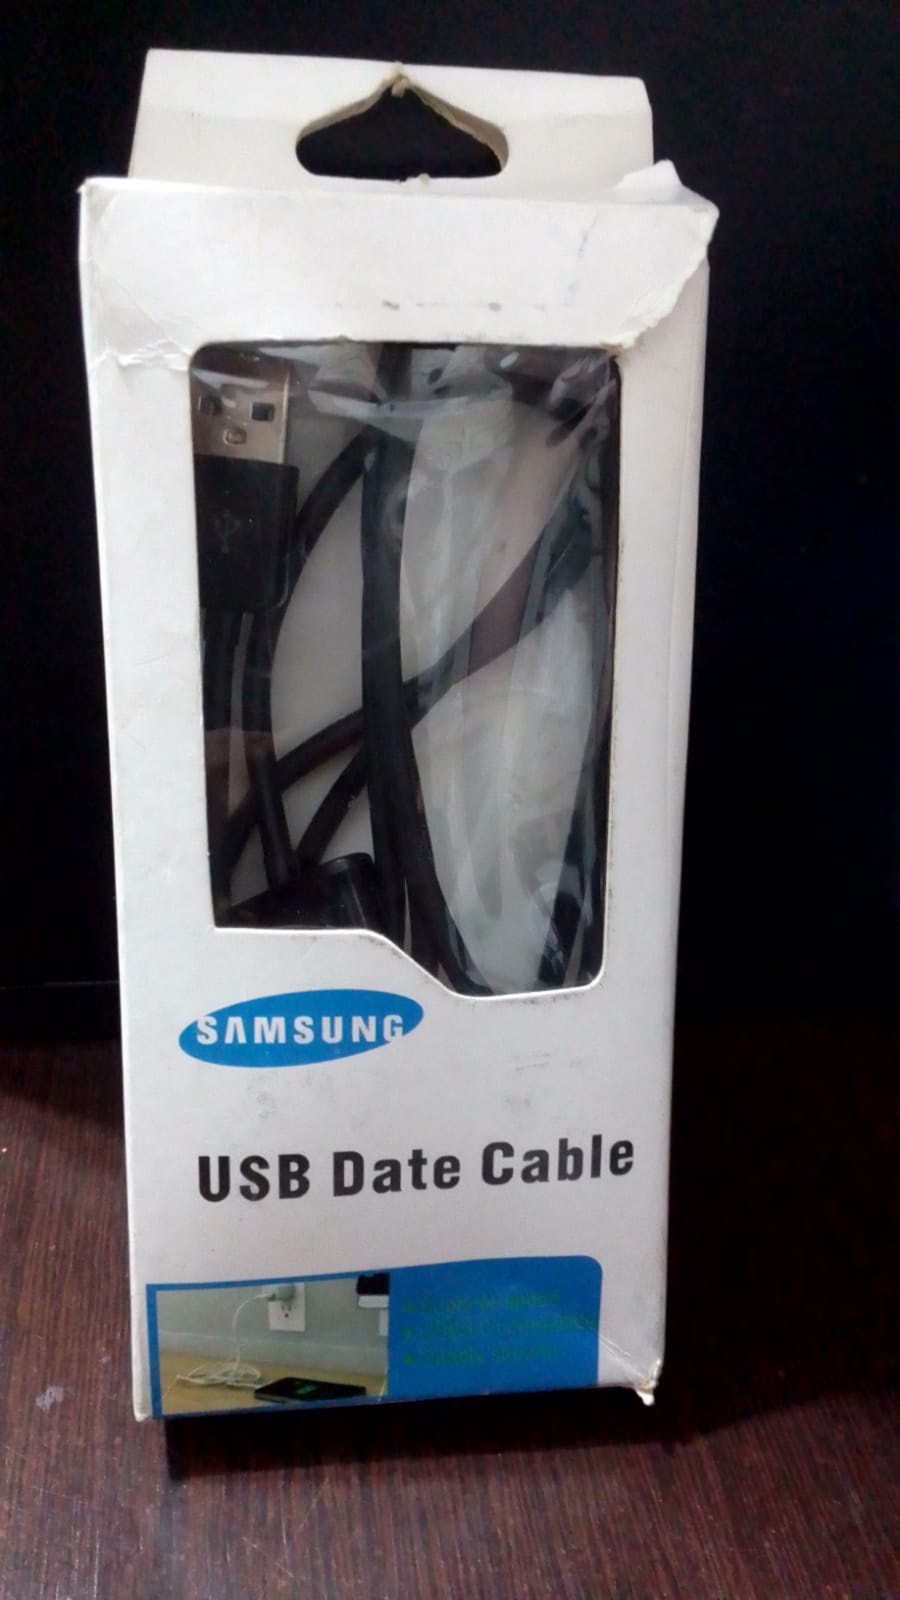  - Cabos  - unidade            Cod. USB DATE CABLE SAMSUNG